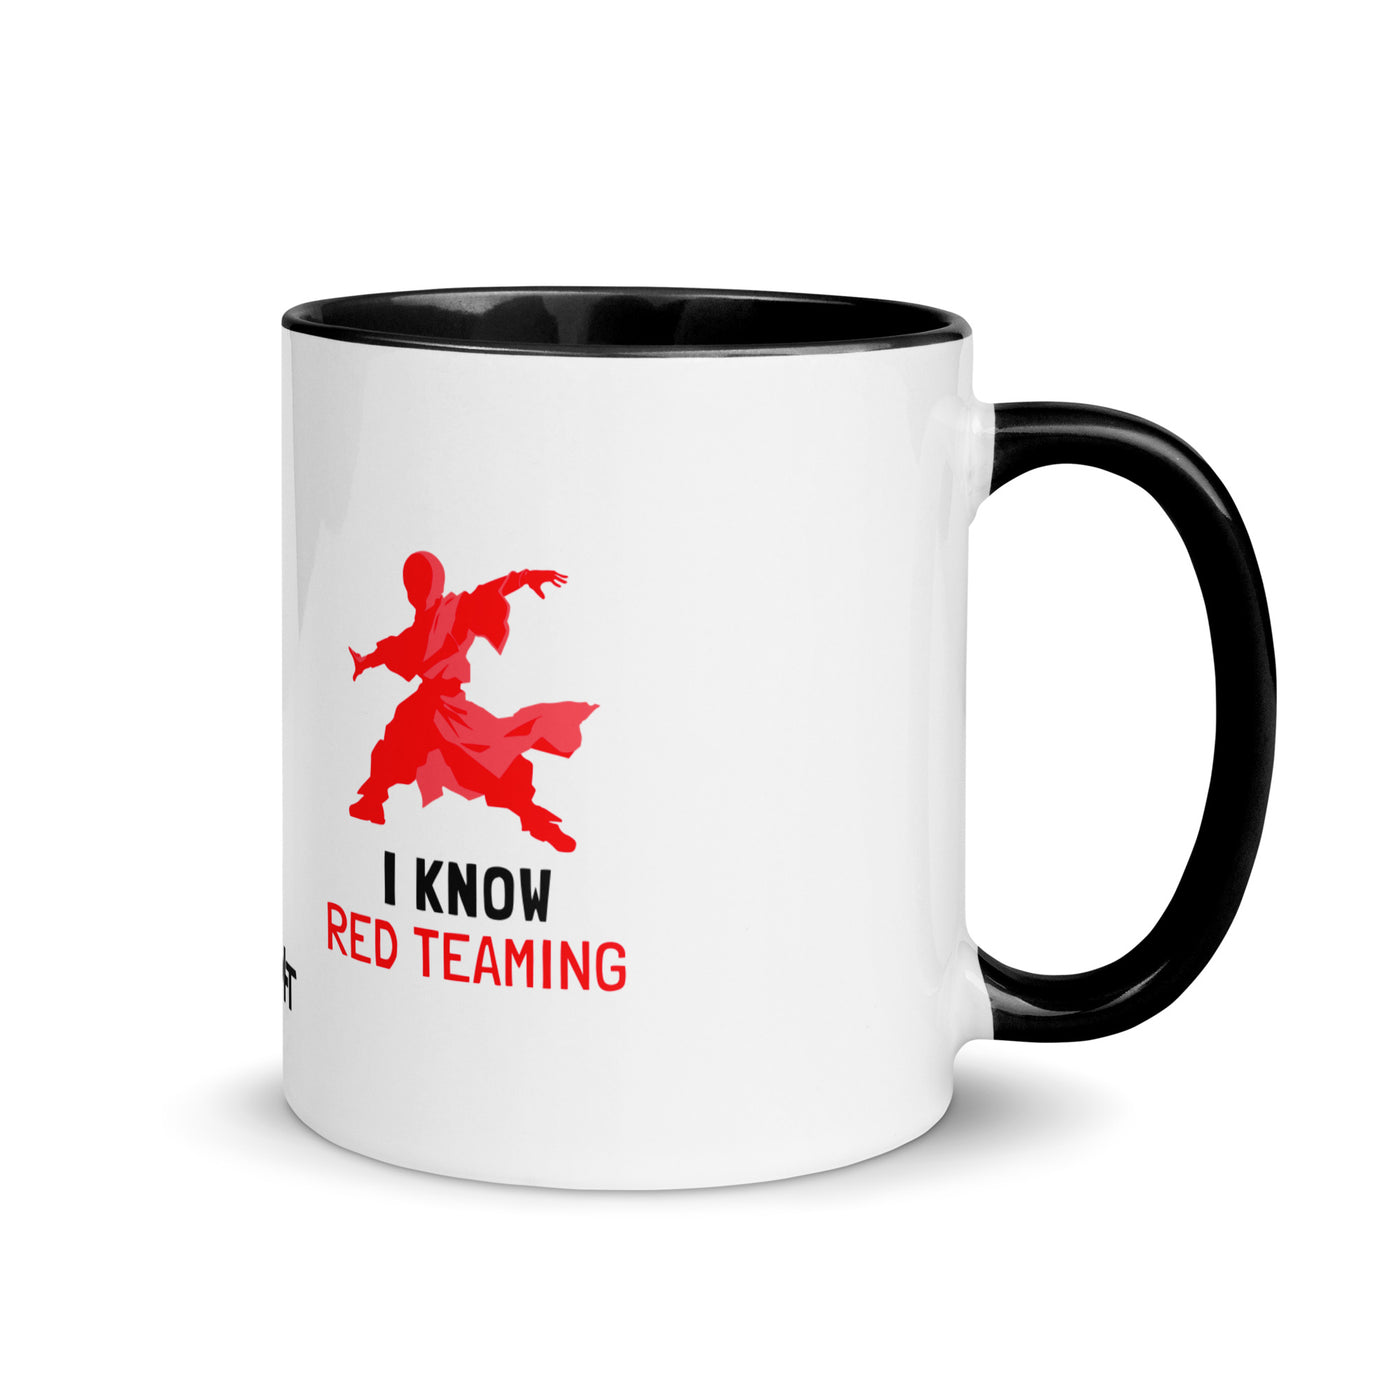 I Know Red Teaming - Mug with Color Inside